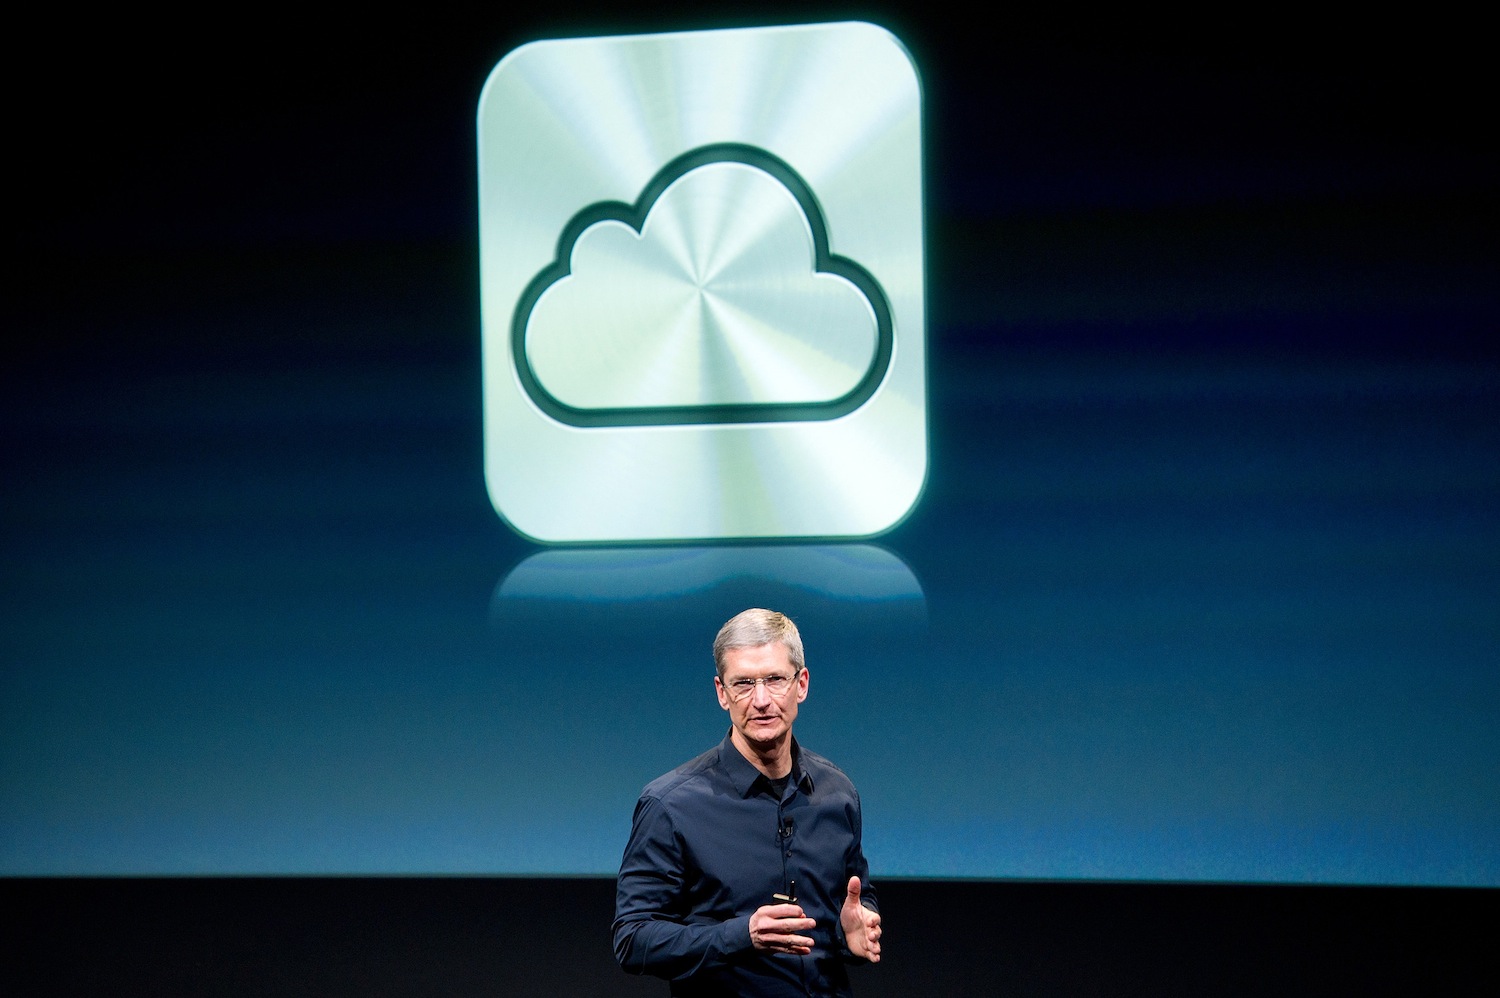 Apple CEO Tim Cook Announces the Apple iPhone 4s